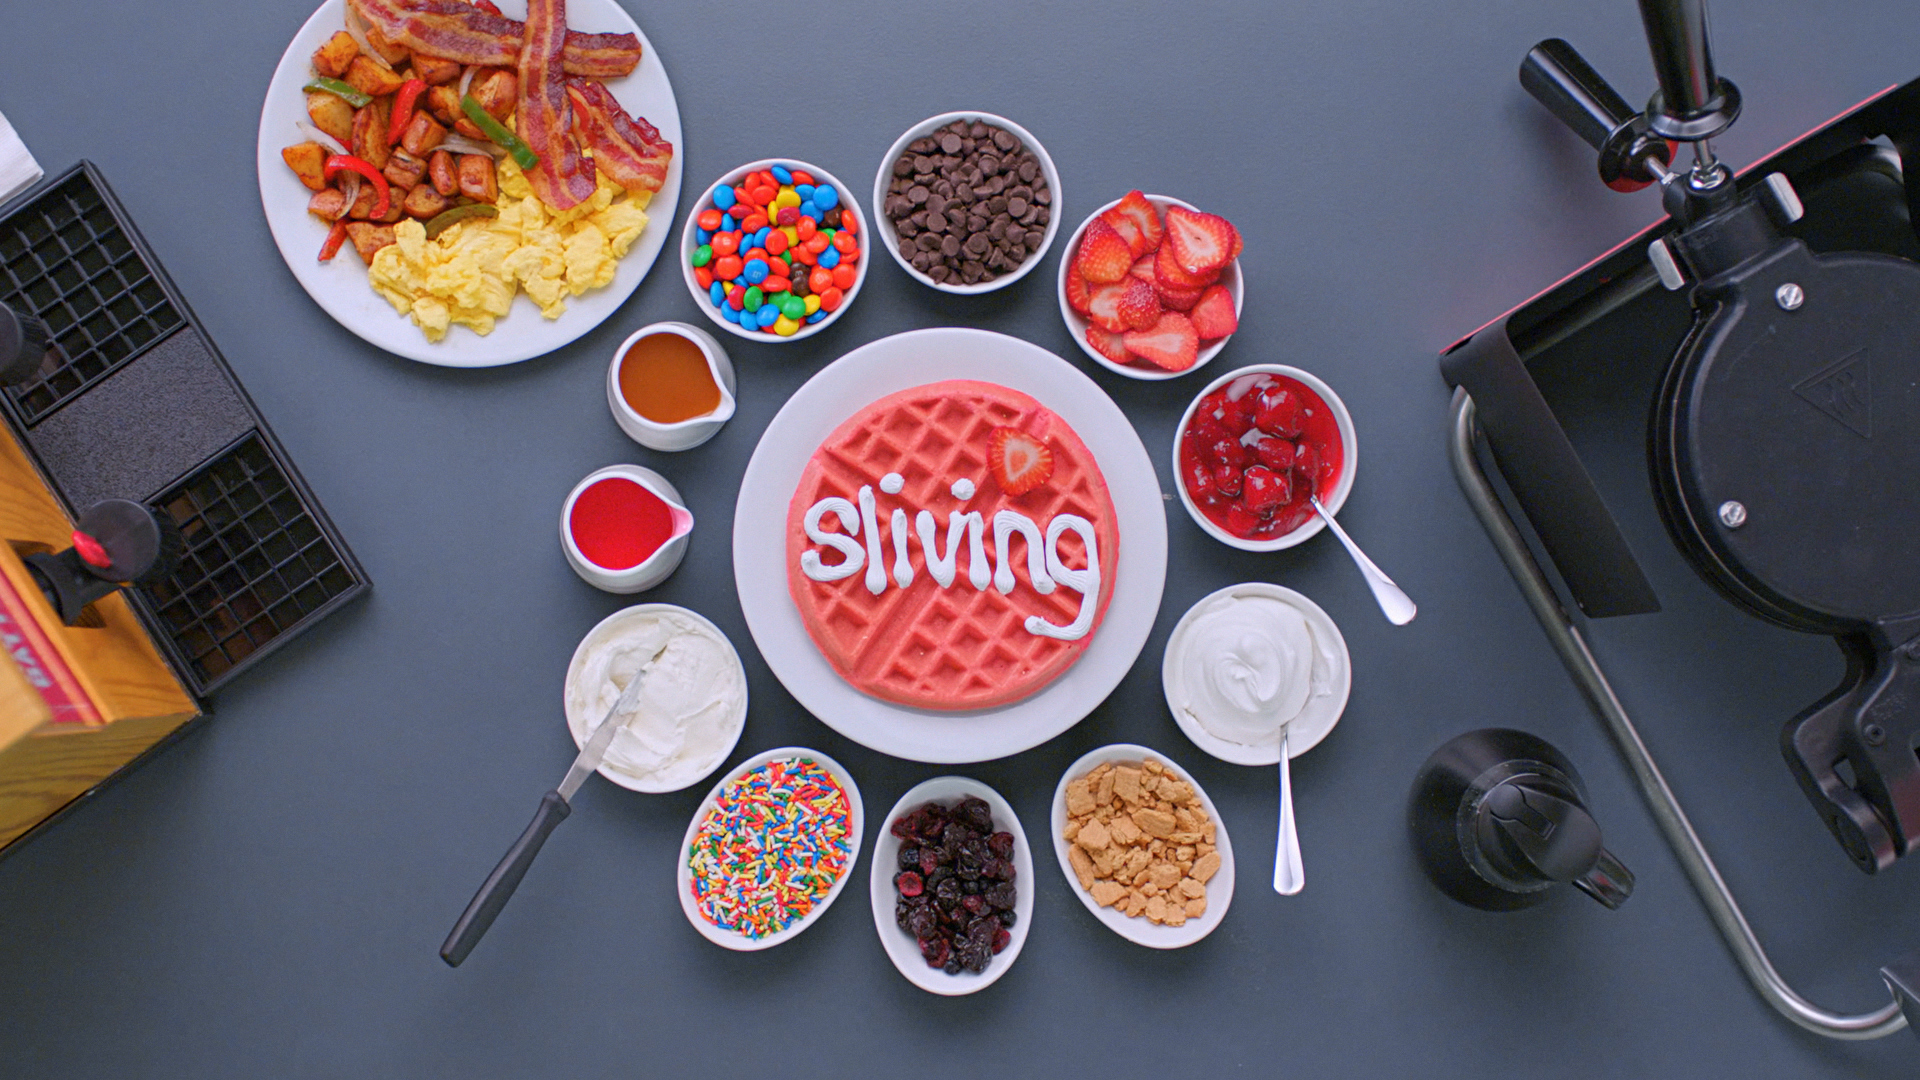 Hampton by Hilton Strawberry Waffle and Toppings with 'Sliving' written in whipped cream